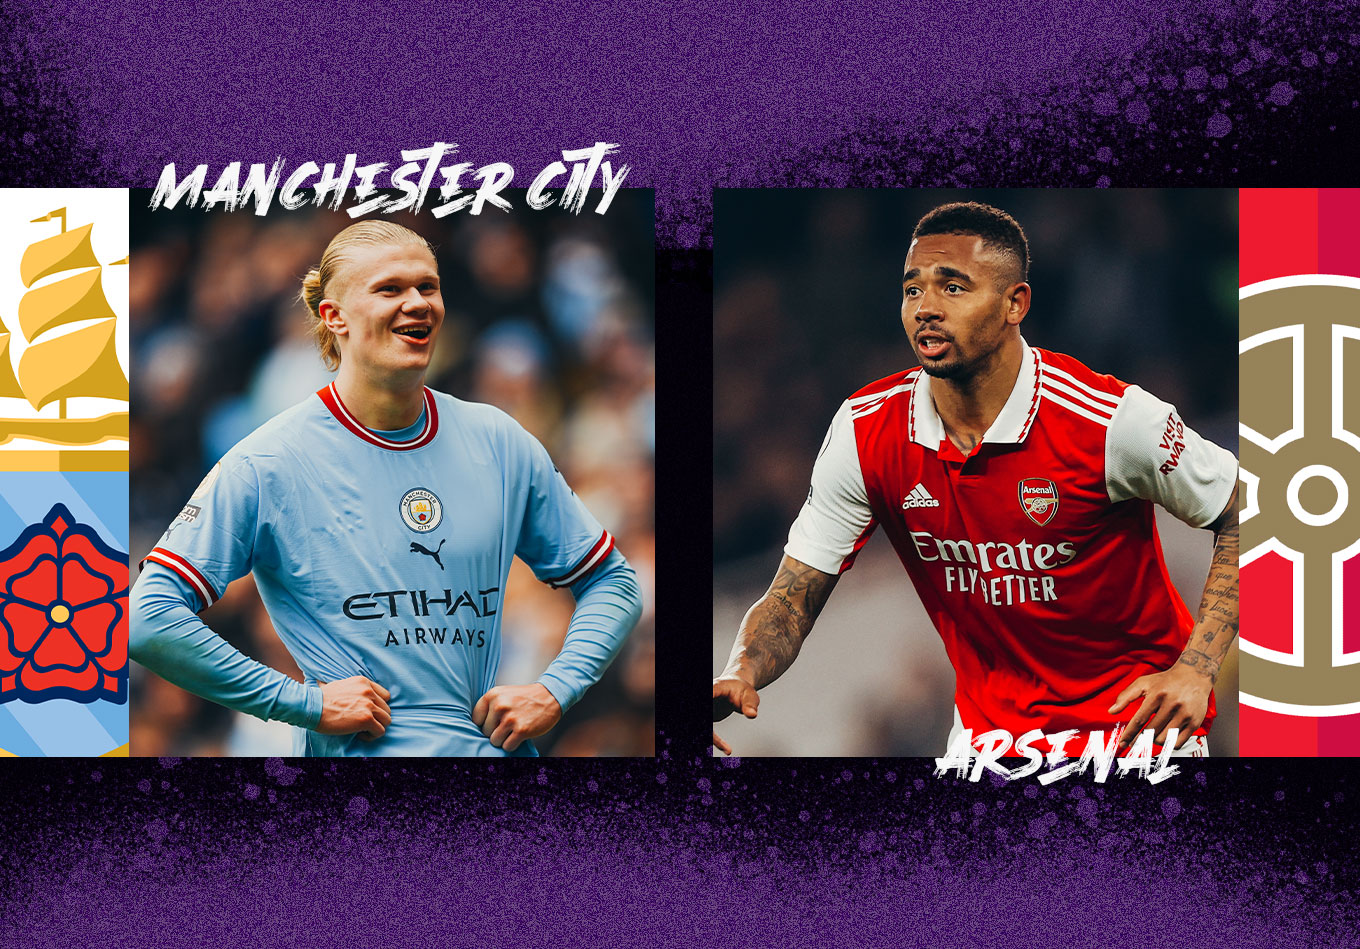 Manchester City vs Arsenal: Prediction and Stats | The Analyst